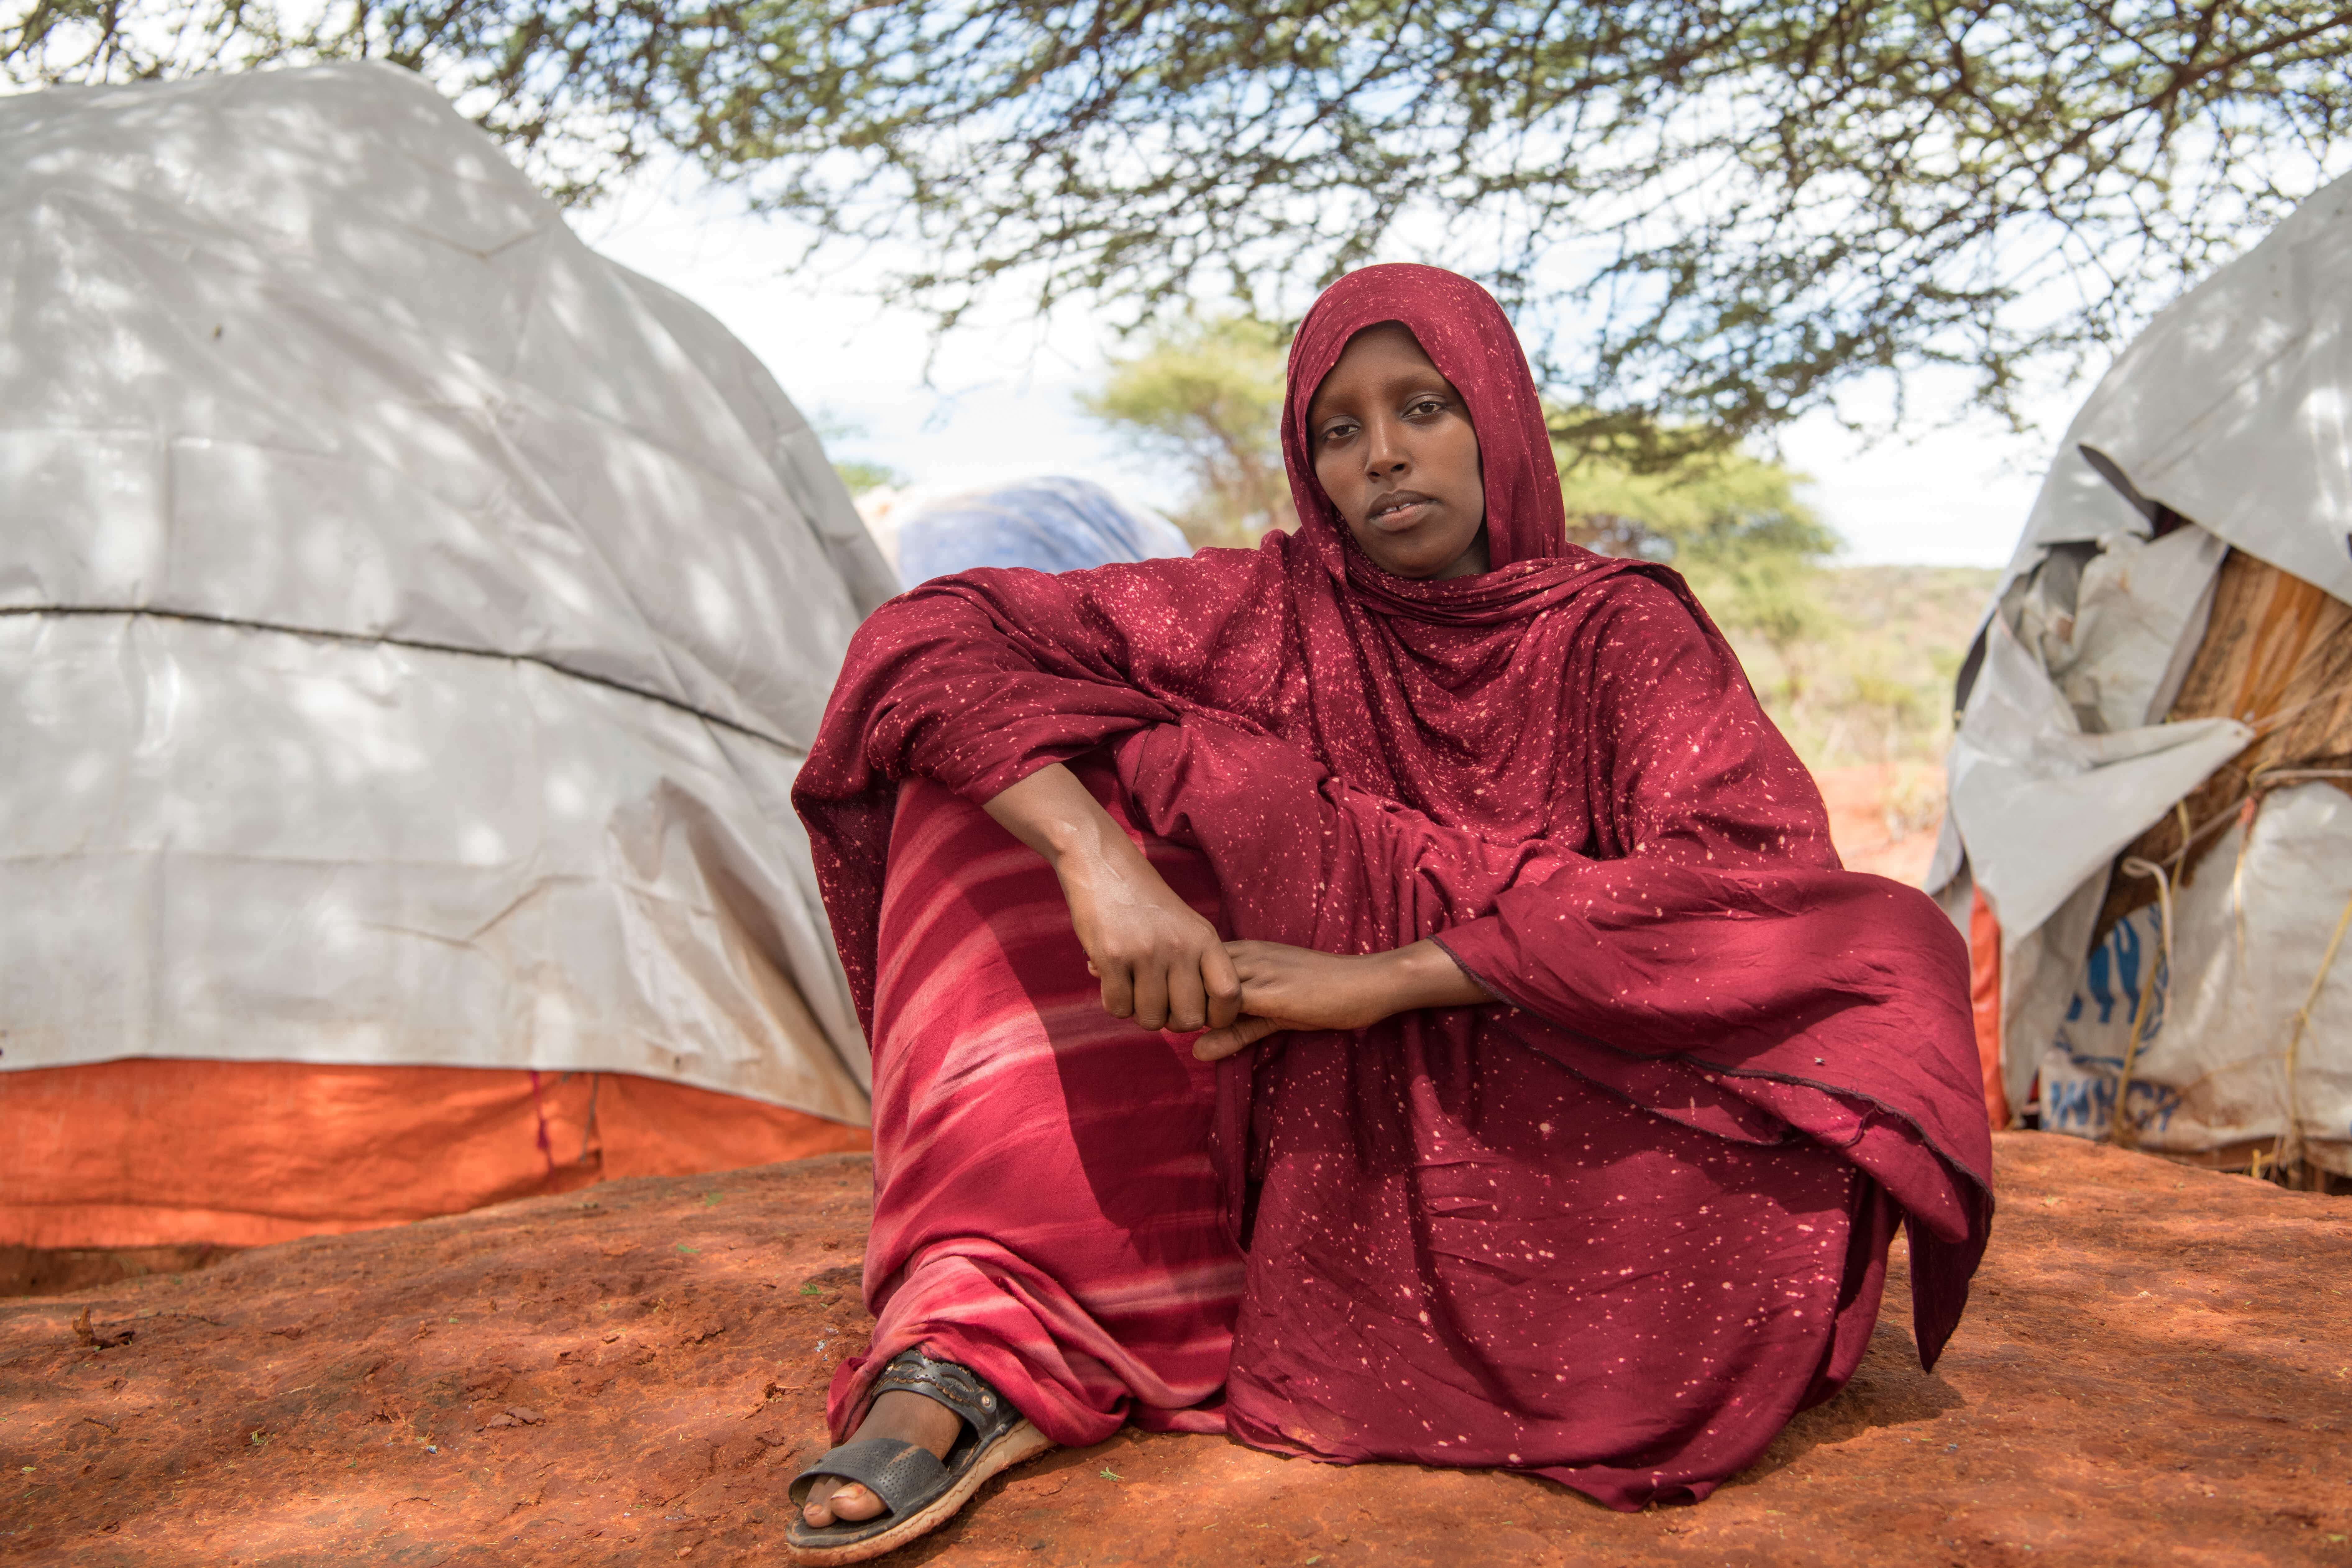 Anfac is a pastoralist, who was forced to leave her home after all of her livestock perished. Over 40 million people have been affected by the prolonged drought in the East Africa region.